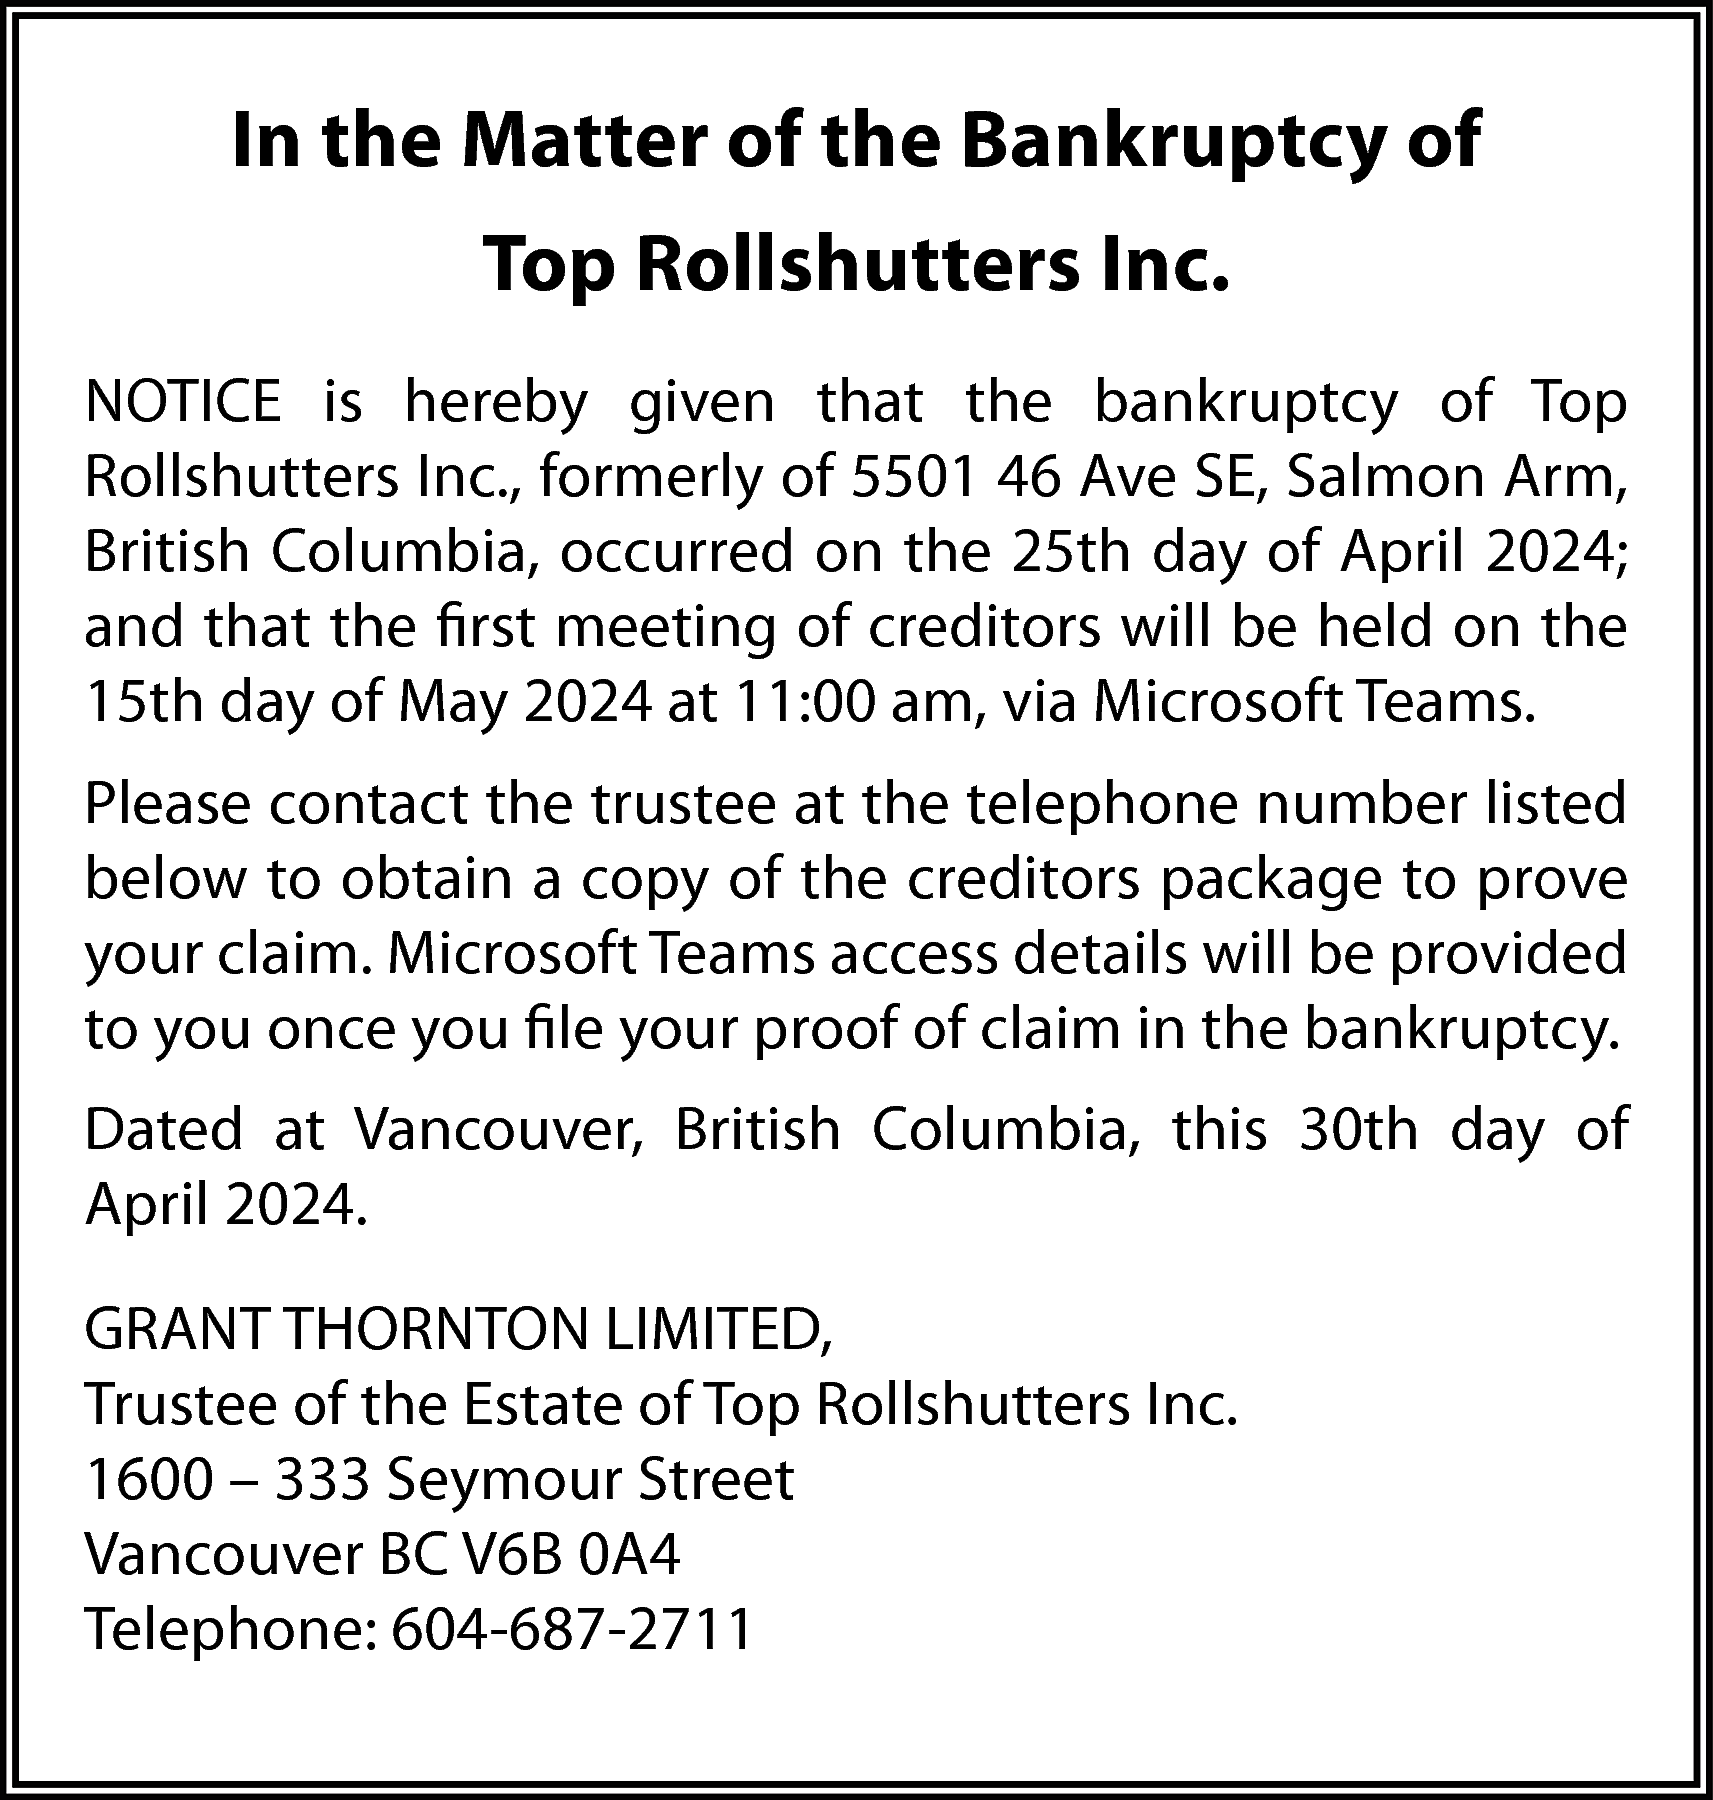 In the Matter of the  In the Matter of the Bankruptcy of  Top Rollshutters Inc.  NOTICE is hereby given that the bankruptcy of Top  Rollshutters Inc., formerly of 5501 46 Ave SE, Salmon Arm,  British Columbia, occurred on the 25th day of April 2024;  and that the first meeting of creditors will be held on the  15th day of May 2024 at 11:00 am, via Microsoft Teams.  Please contact the trustee at the telephone number listed  below to obtain a copy of the creditors package to prove  your claim. Microsoft Teams access details will be provided  to you once you file your proof of claim in the bankruptcy.  Dated at Vancouver, British Columbia, this 30th day of  April 2024.  GRANT THORNTON LIMITED,  Trustee of the Estate of Top Rollshutters Inc.  1600 – 333 Seymour Street  Vancouver BC V6B 0A4  Telephone: 604-687-2711    